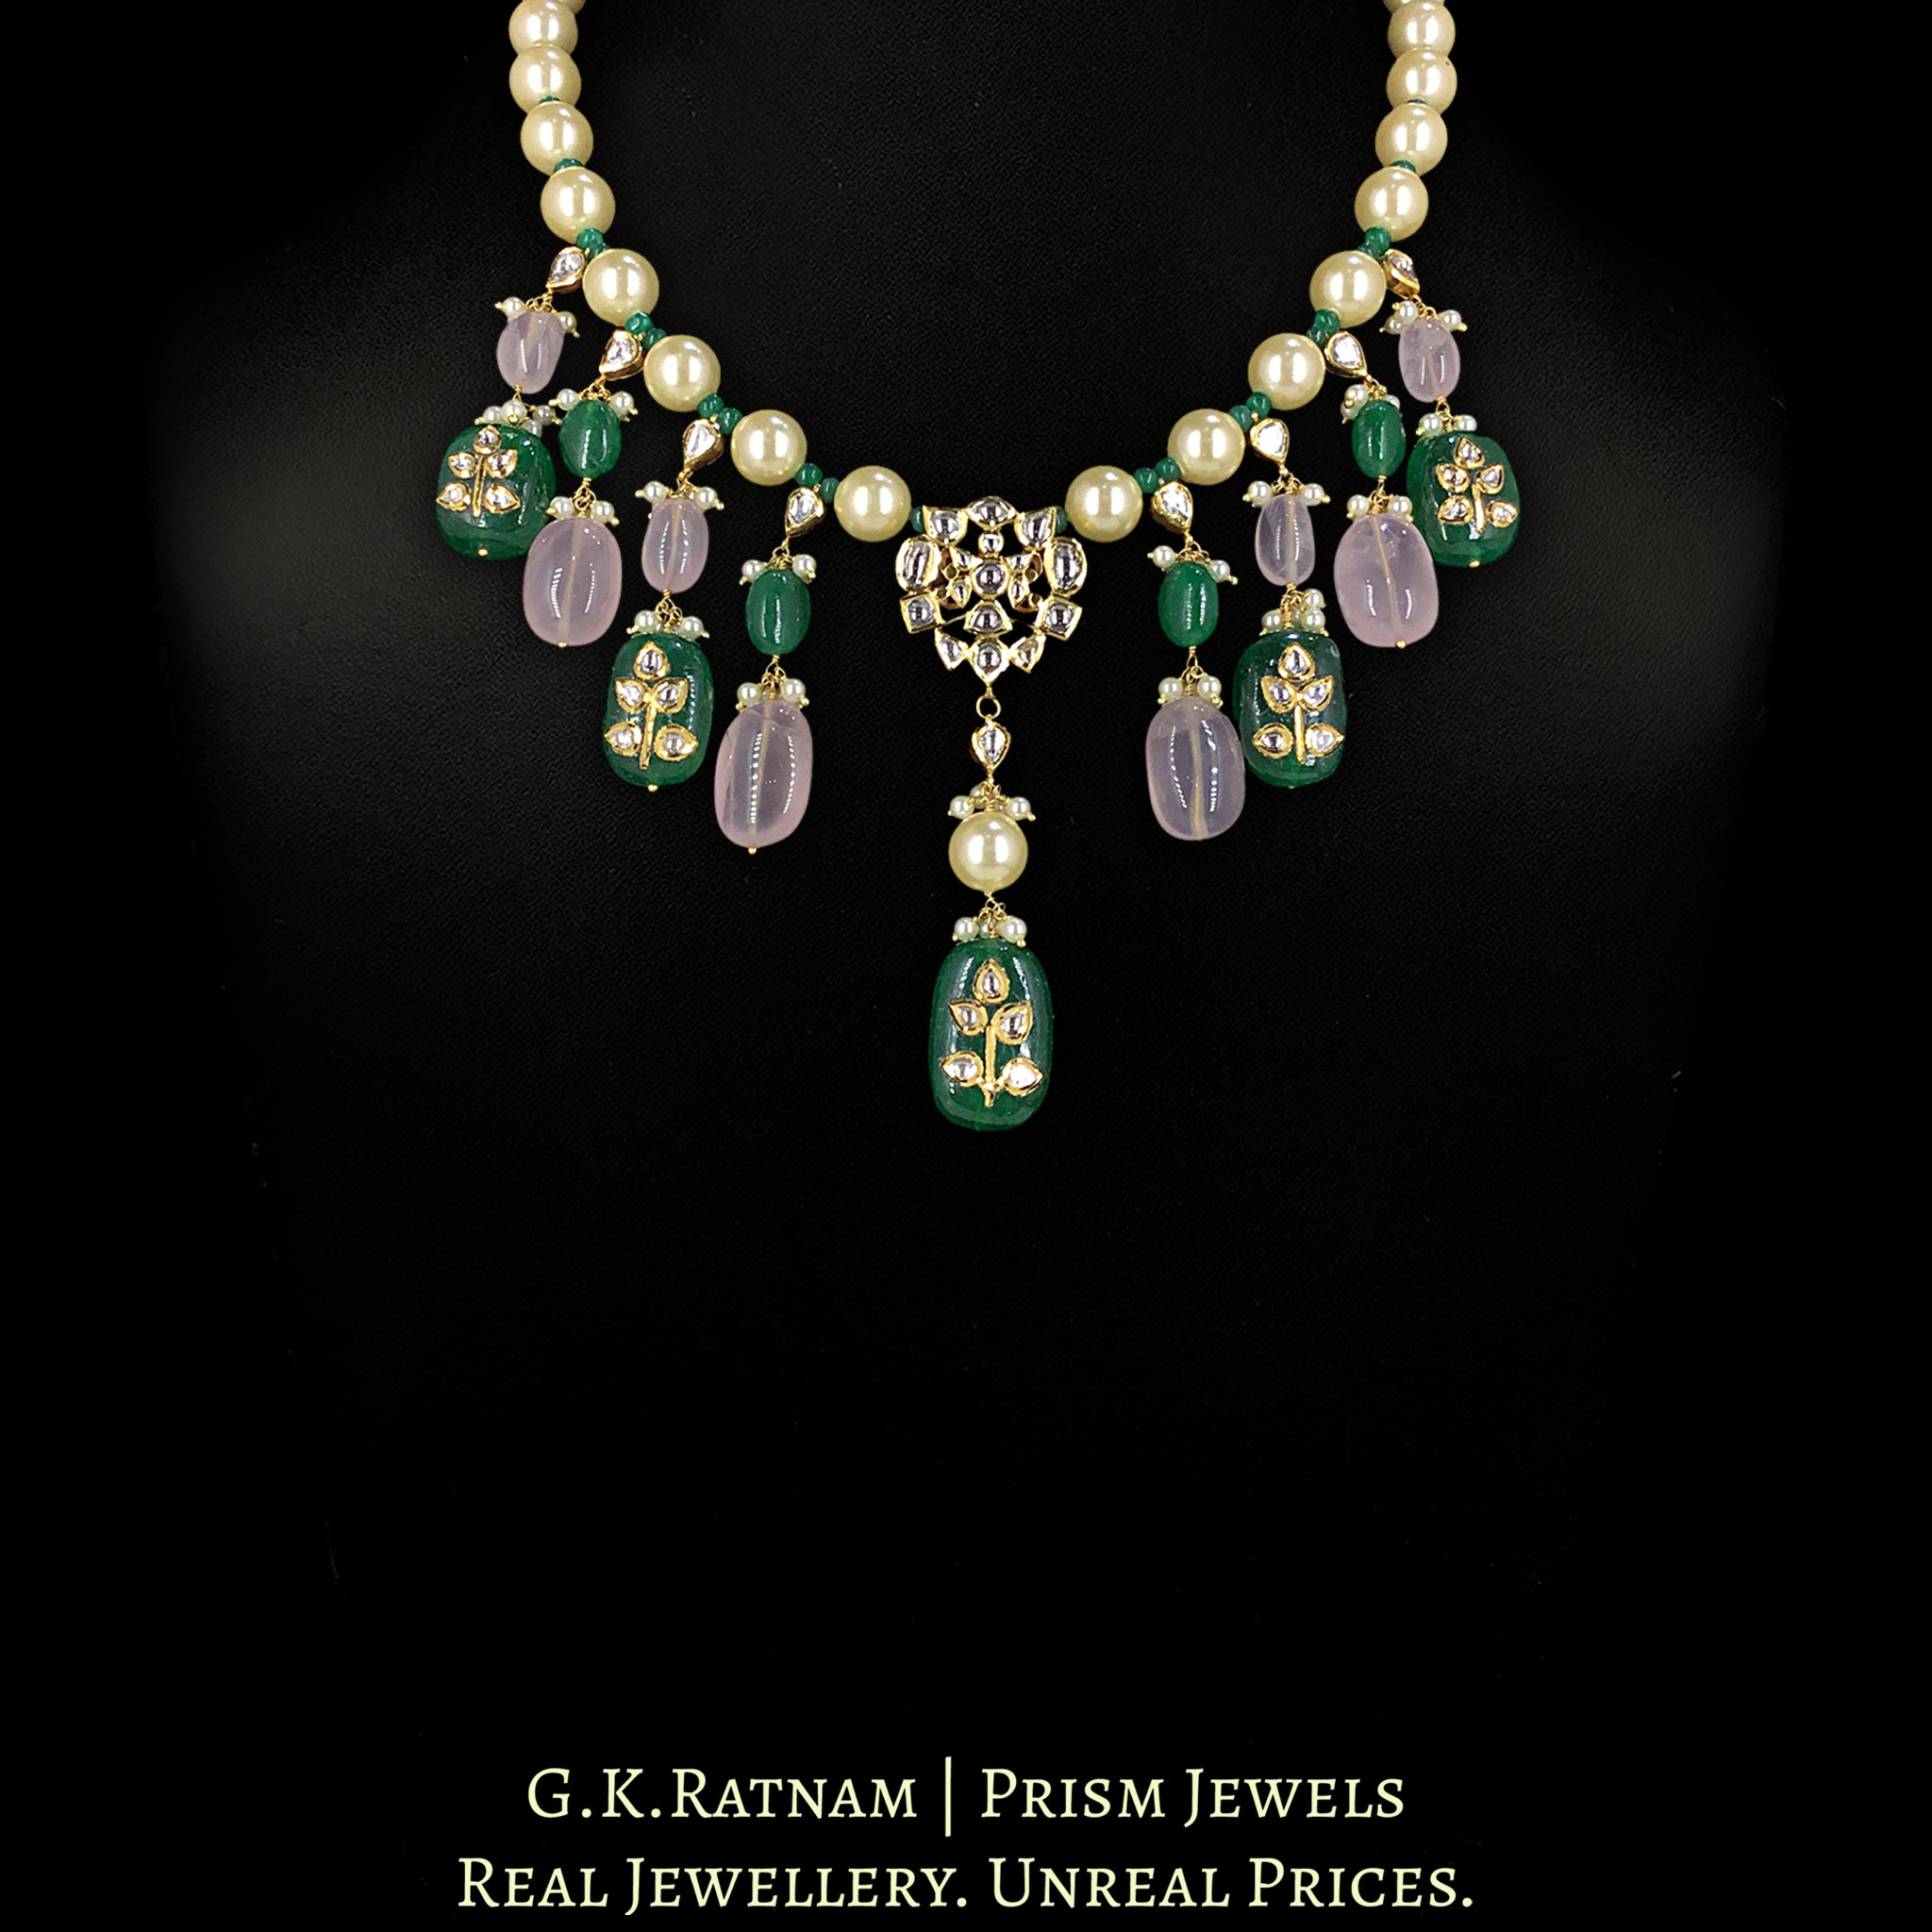 18k Gold and Diamond Polki Necklace with Pearls, Rose Quartz and Beryls with intricately set Polkies